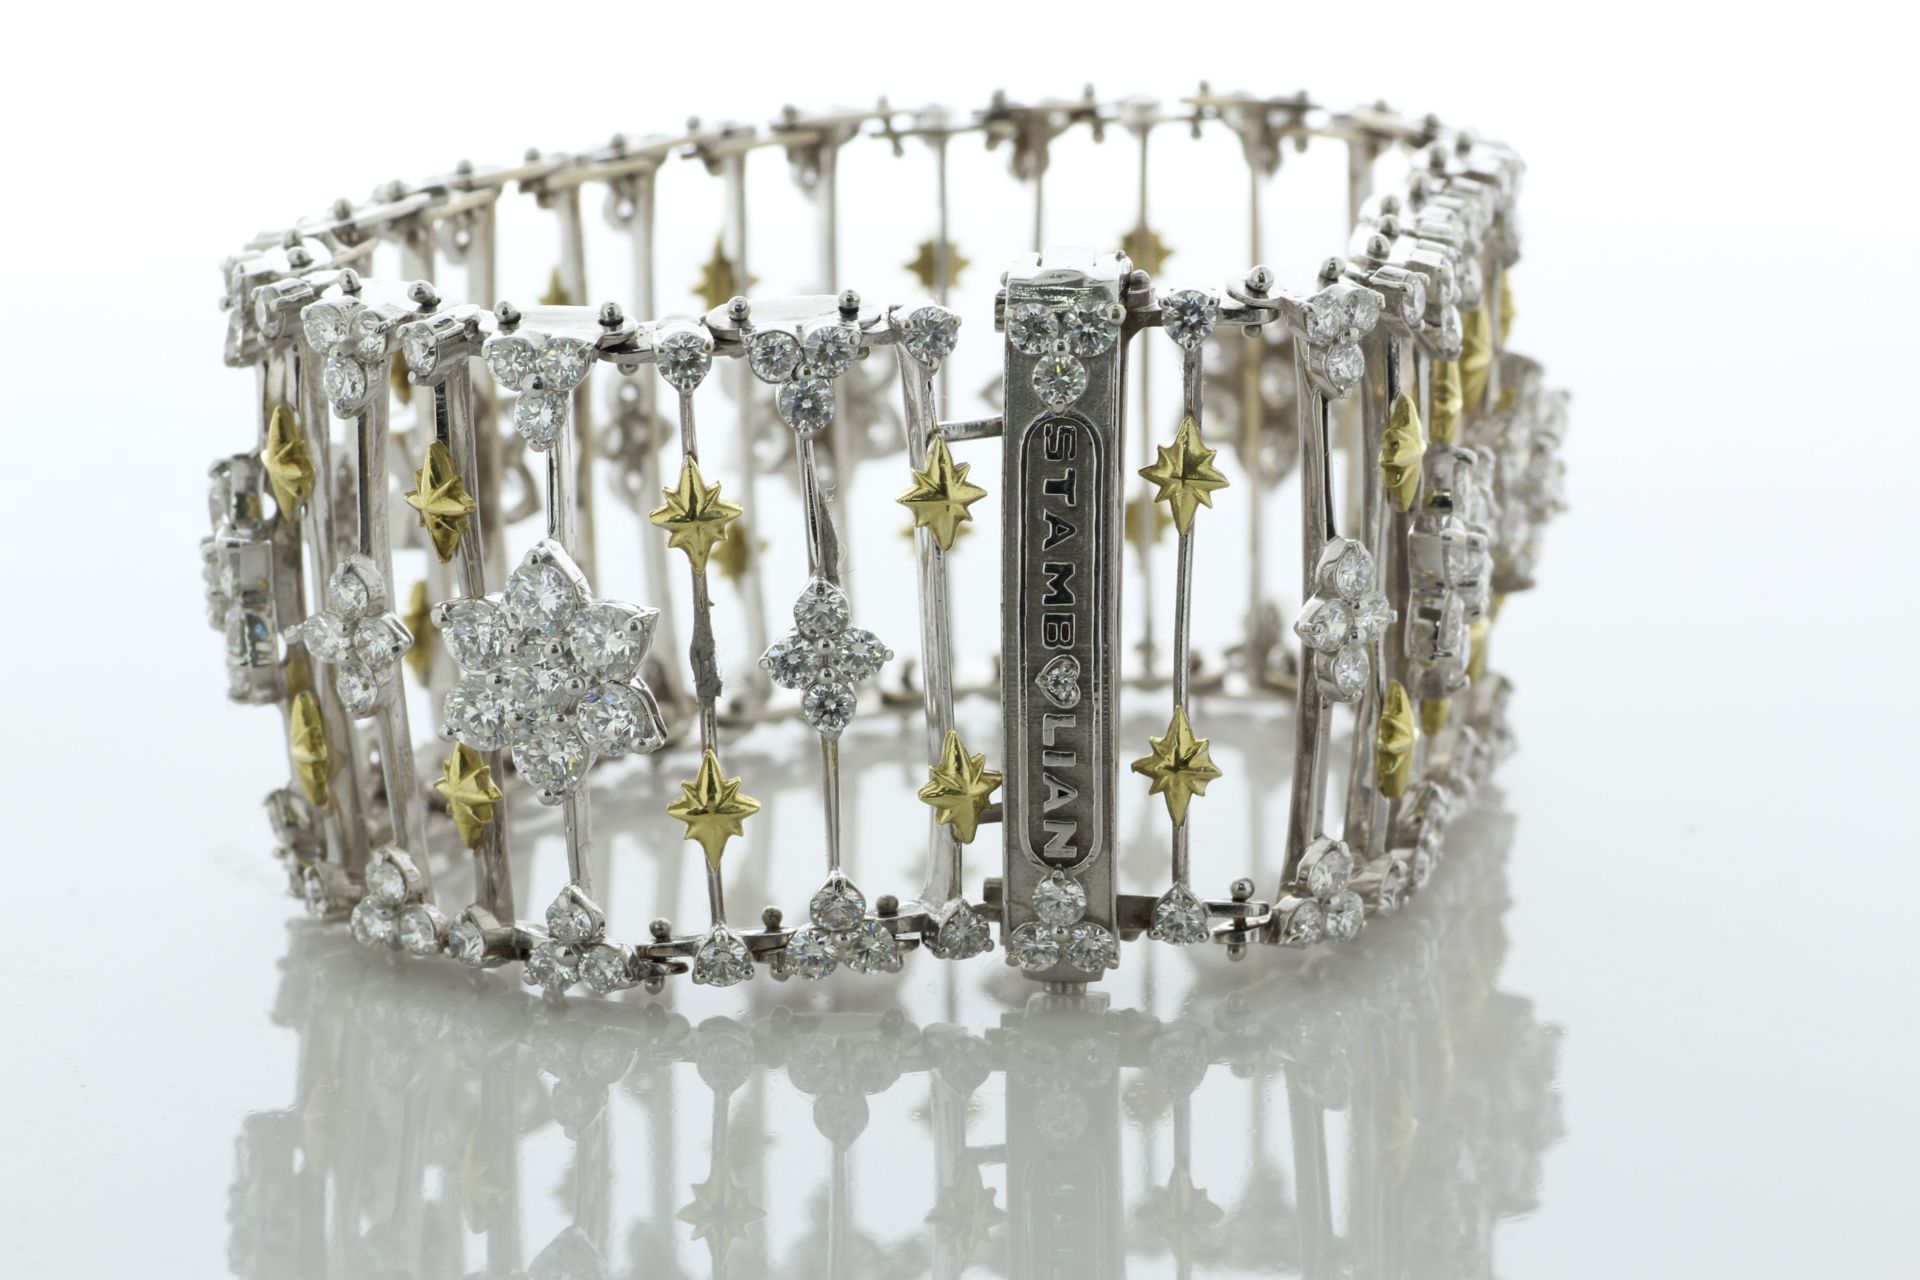 18ct White And Yellow Gold Stambolian Diamond Bracelet 20.67 Carats - Valued By AGI £89,500.00 - - Image 2 of 6